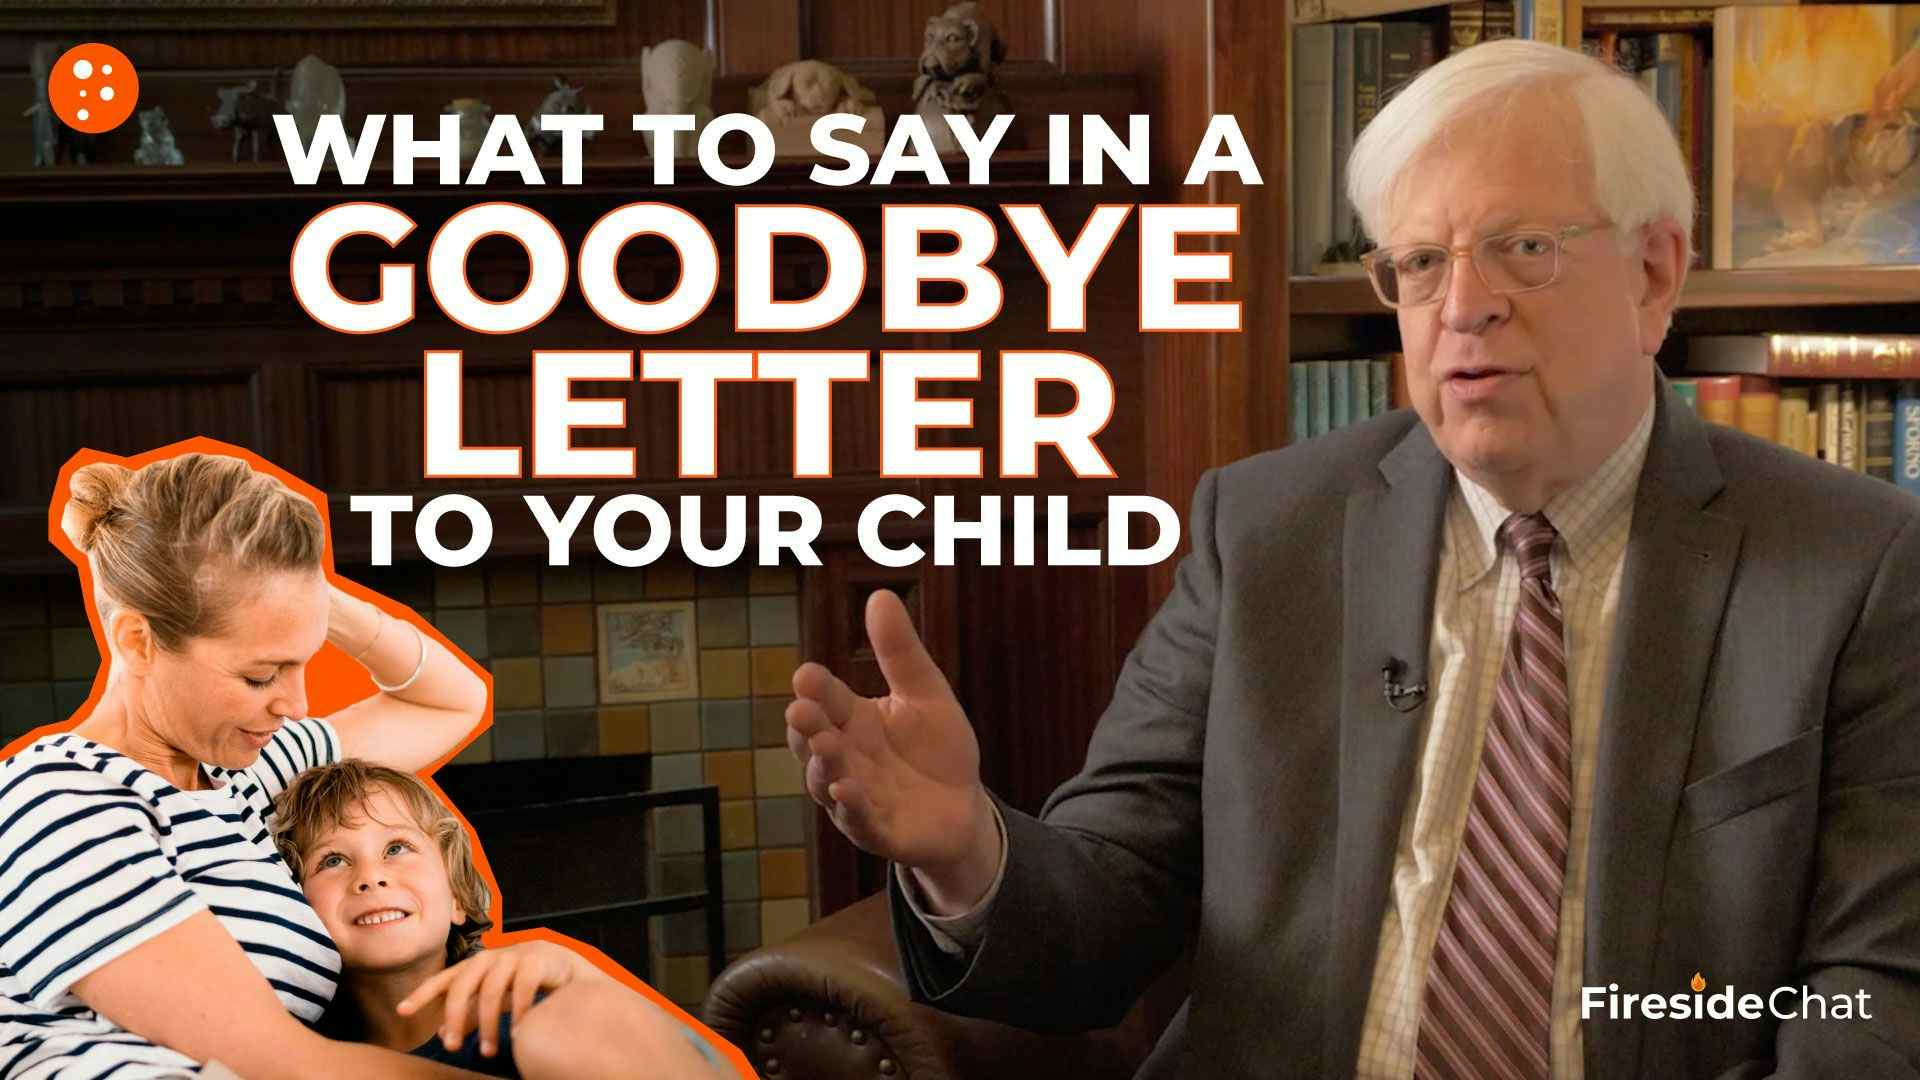 What to Say in a Goodbye Letter to Your Child